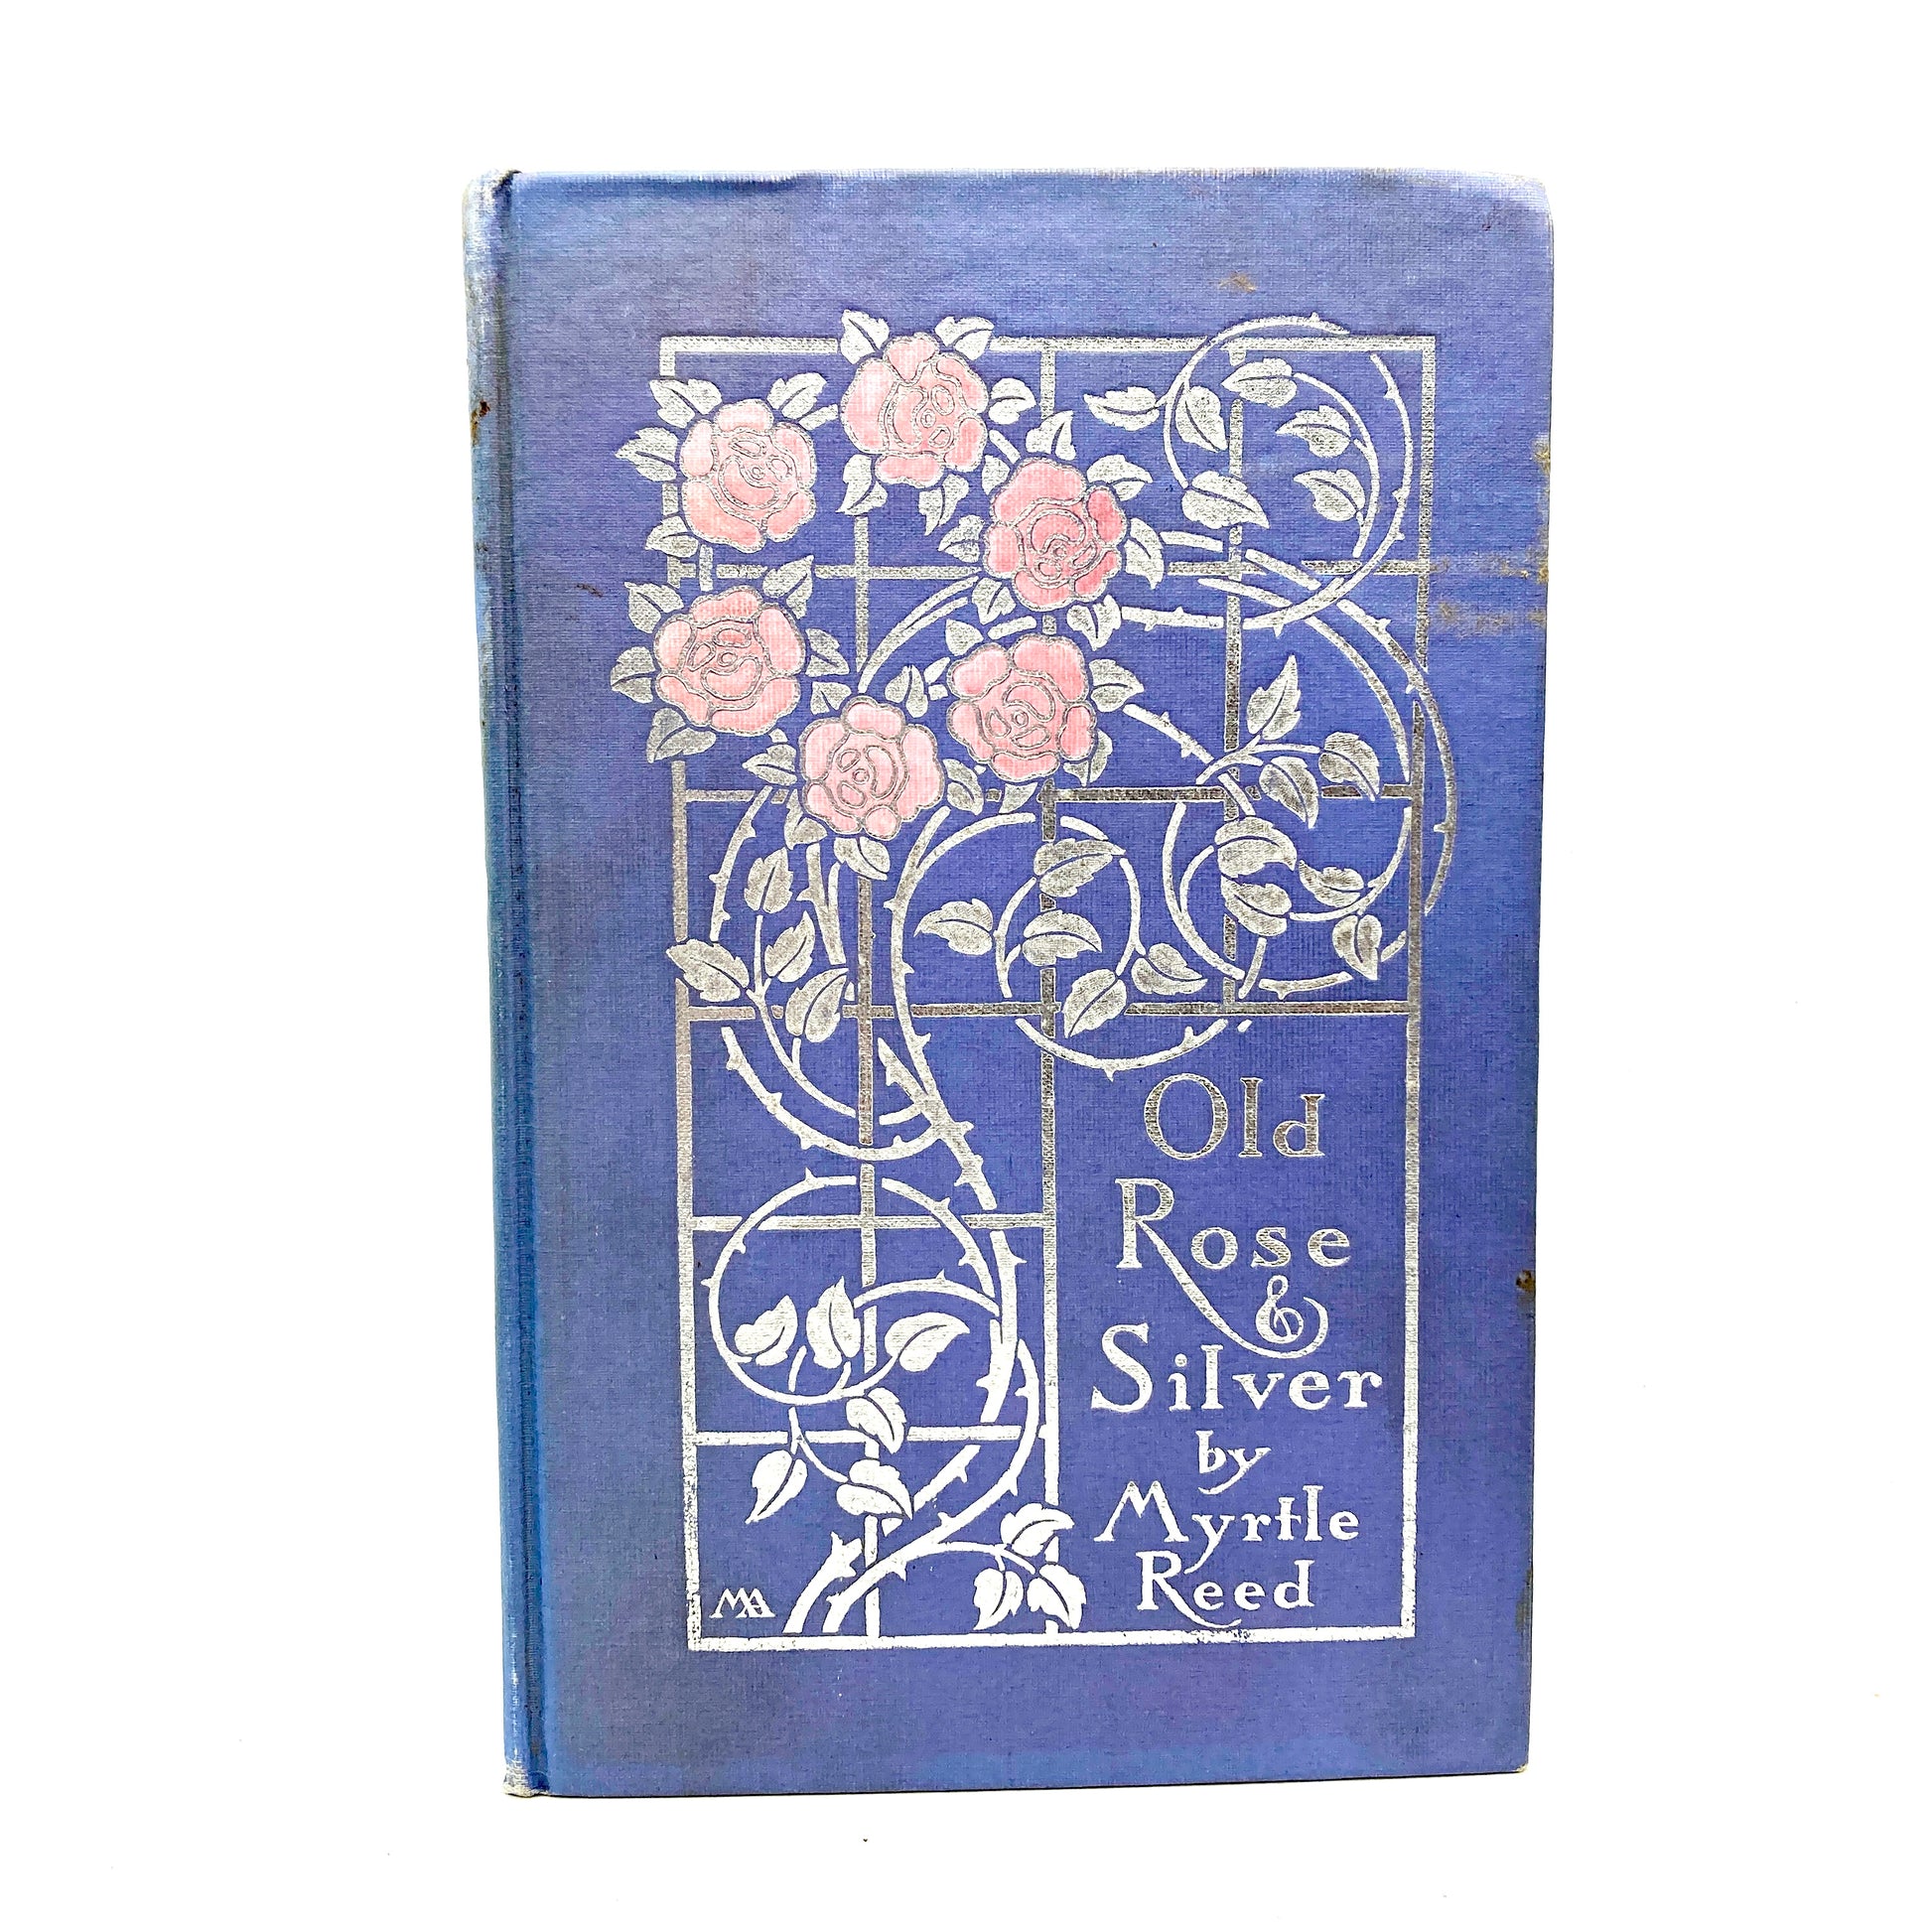 REED, Myrtle "Old Rose & Silver" [G.P. Putnam's Sons, 1909] Margaret Armstrong Cover - Buzz Bookstore